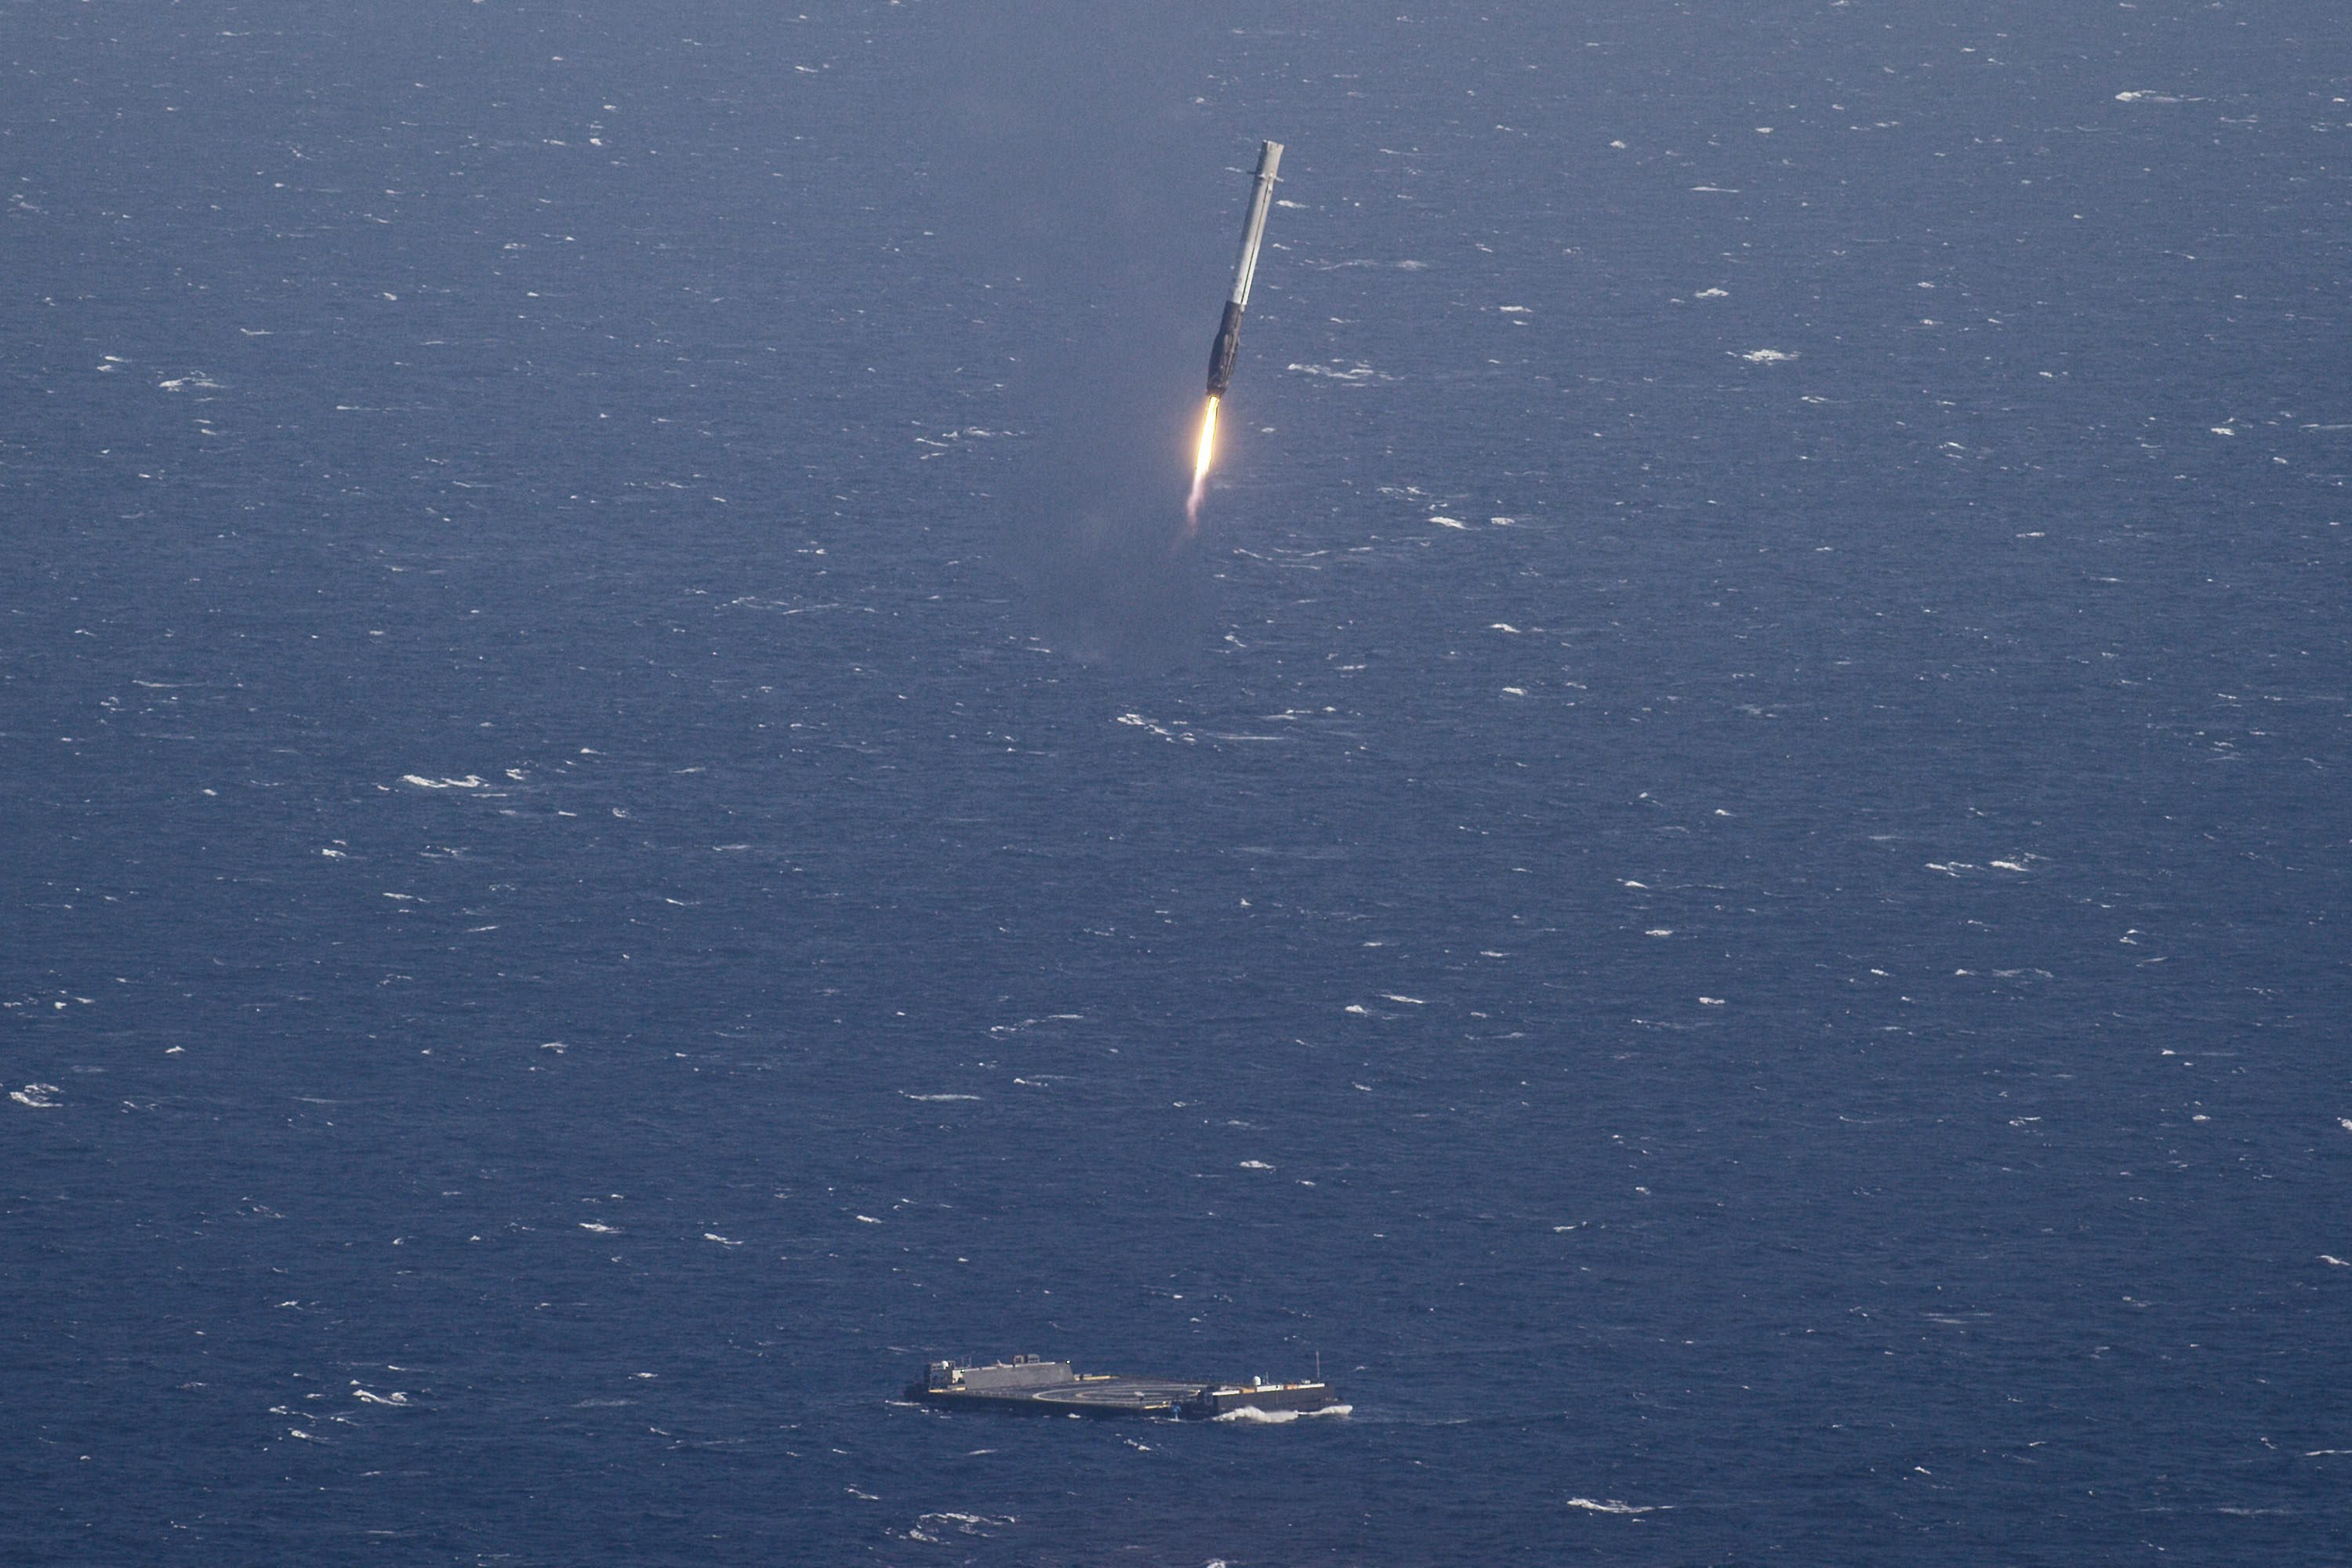 A SpaceX Falcon 9 rocket landing on a platform at sea in the Atlantic Ocean, on April 9, 2016. (SPACEX/EPA)